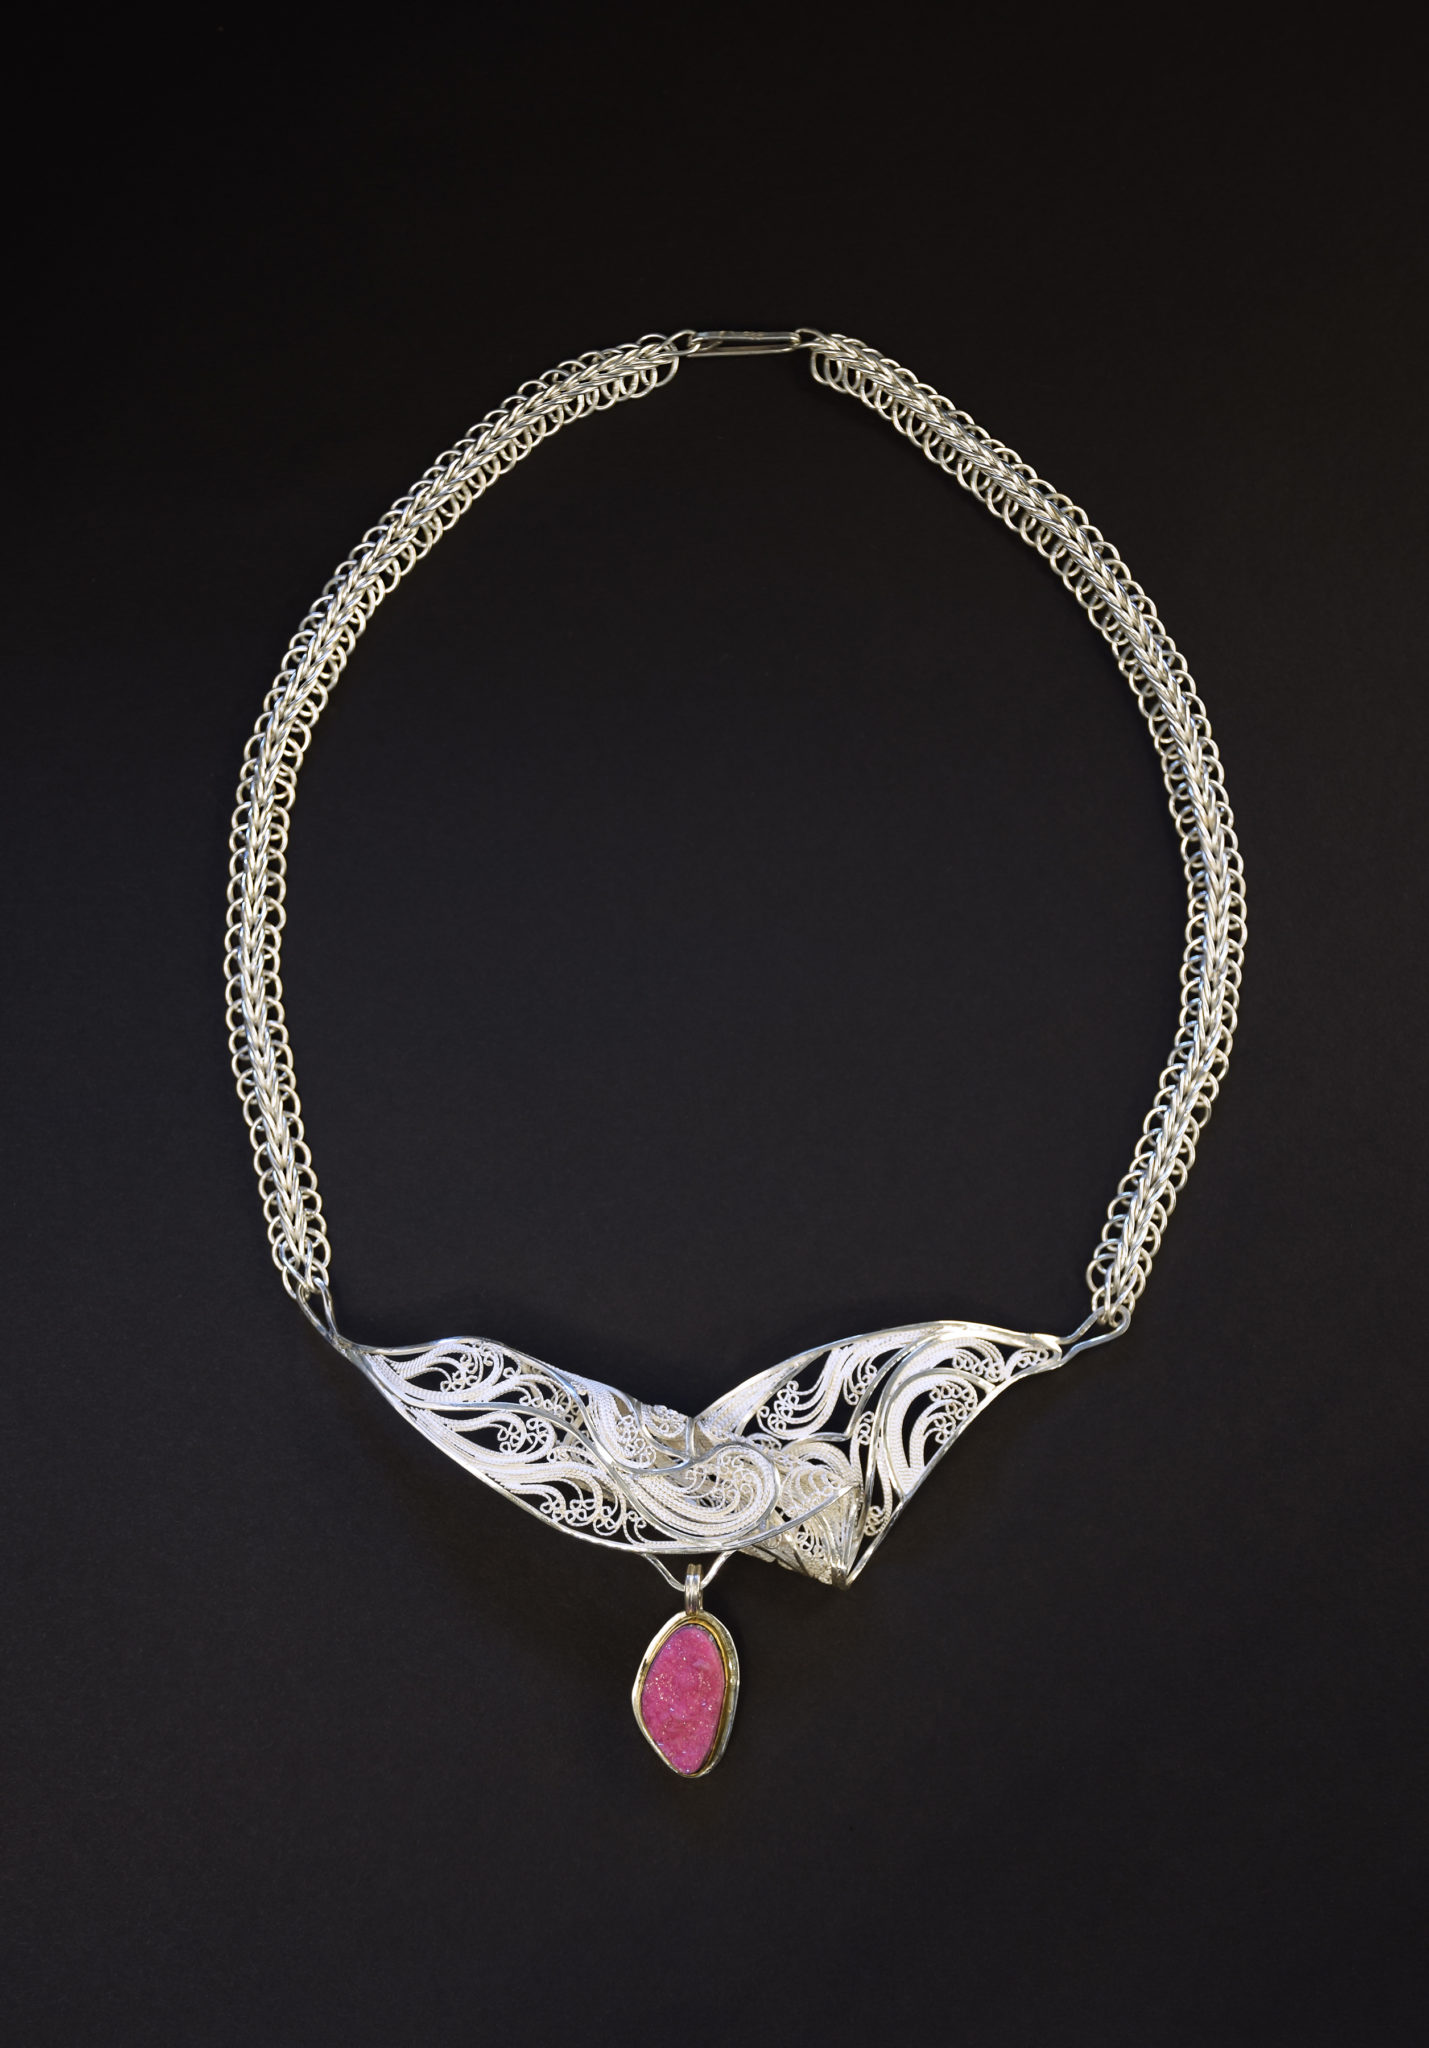 In Aria, Russian filigree necklace by Victoria Lansford